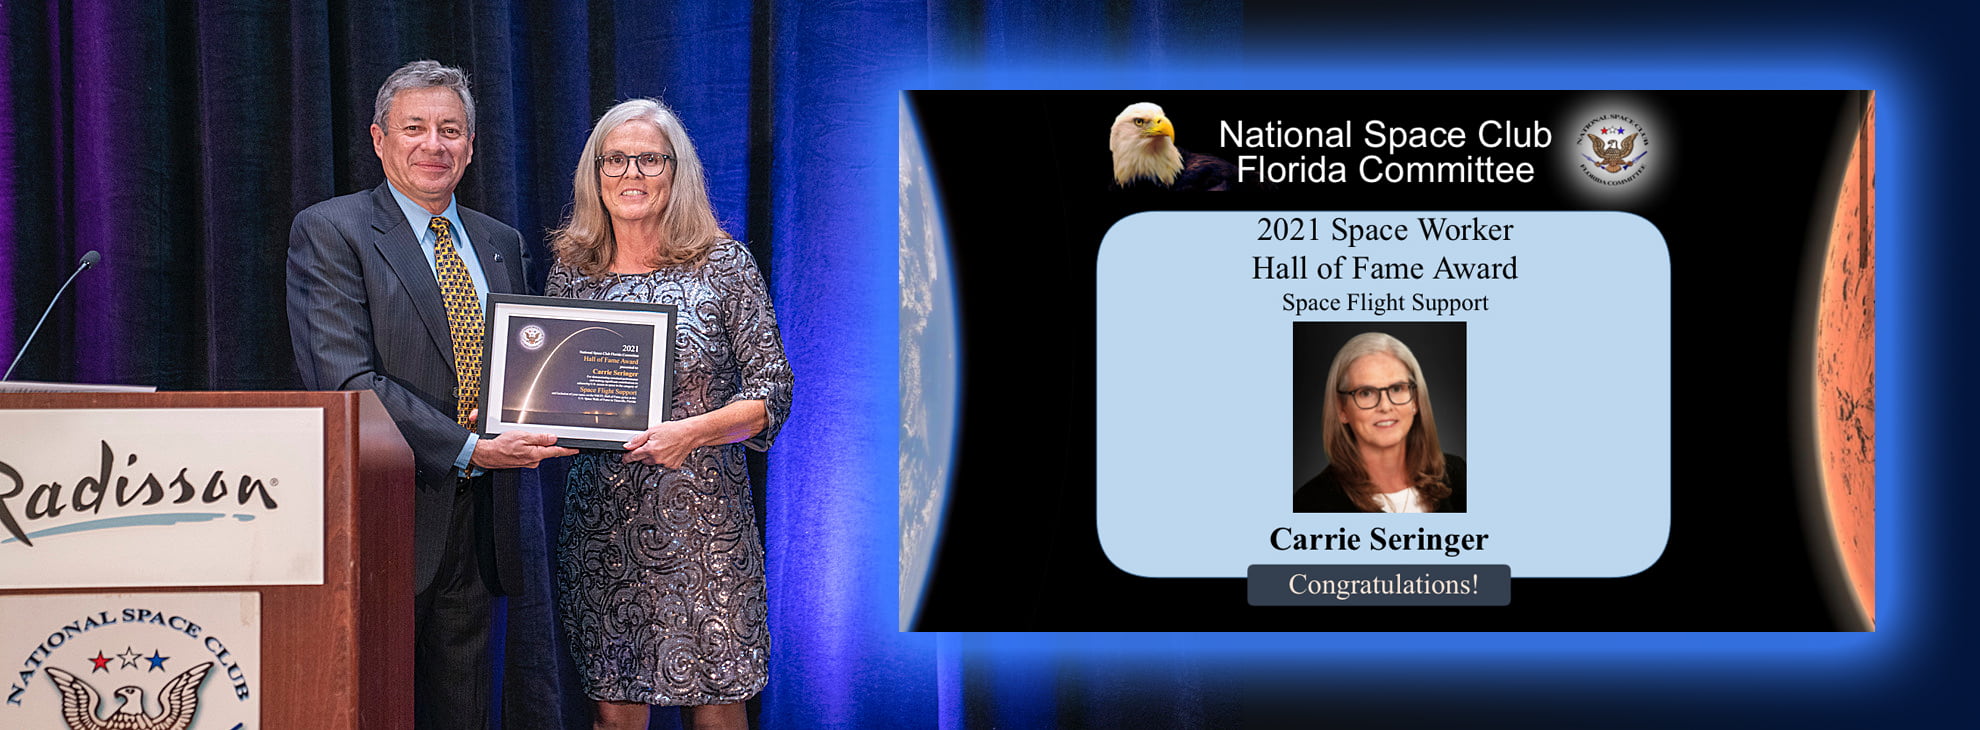 Carrie Seringer - VP Nelson Engineering is Inducted into Space Club Hall of Fame